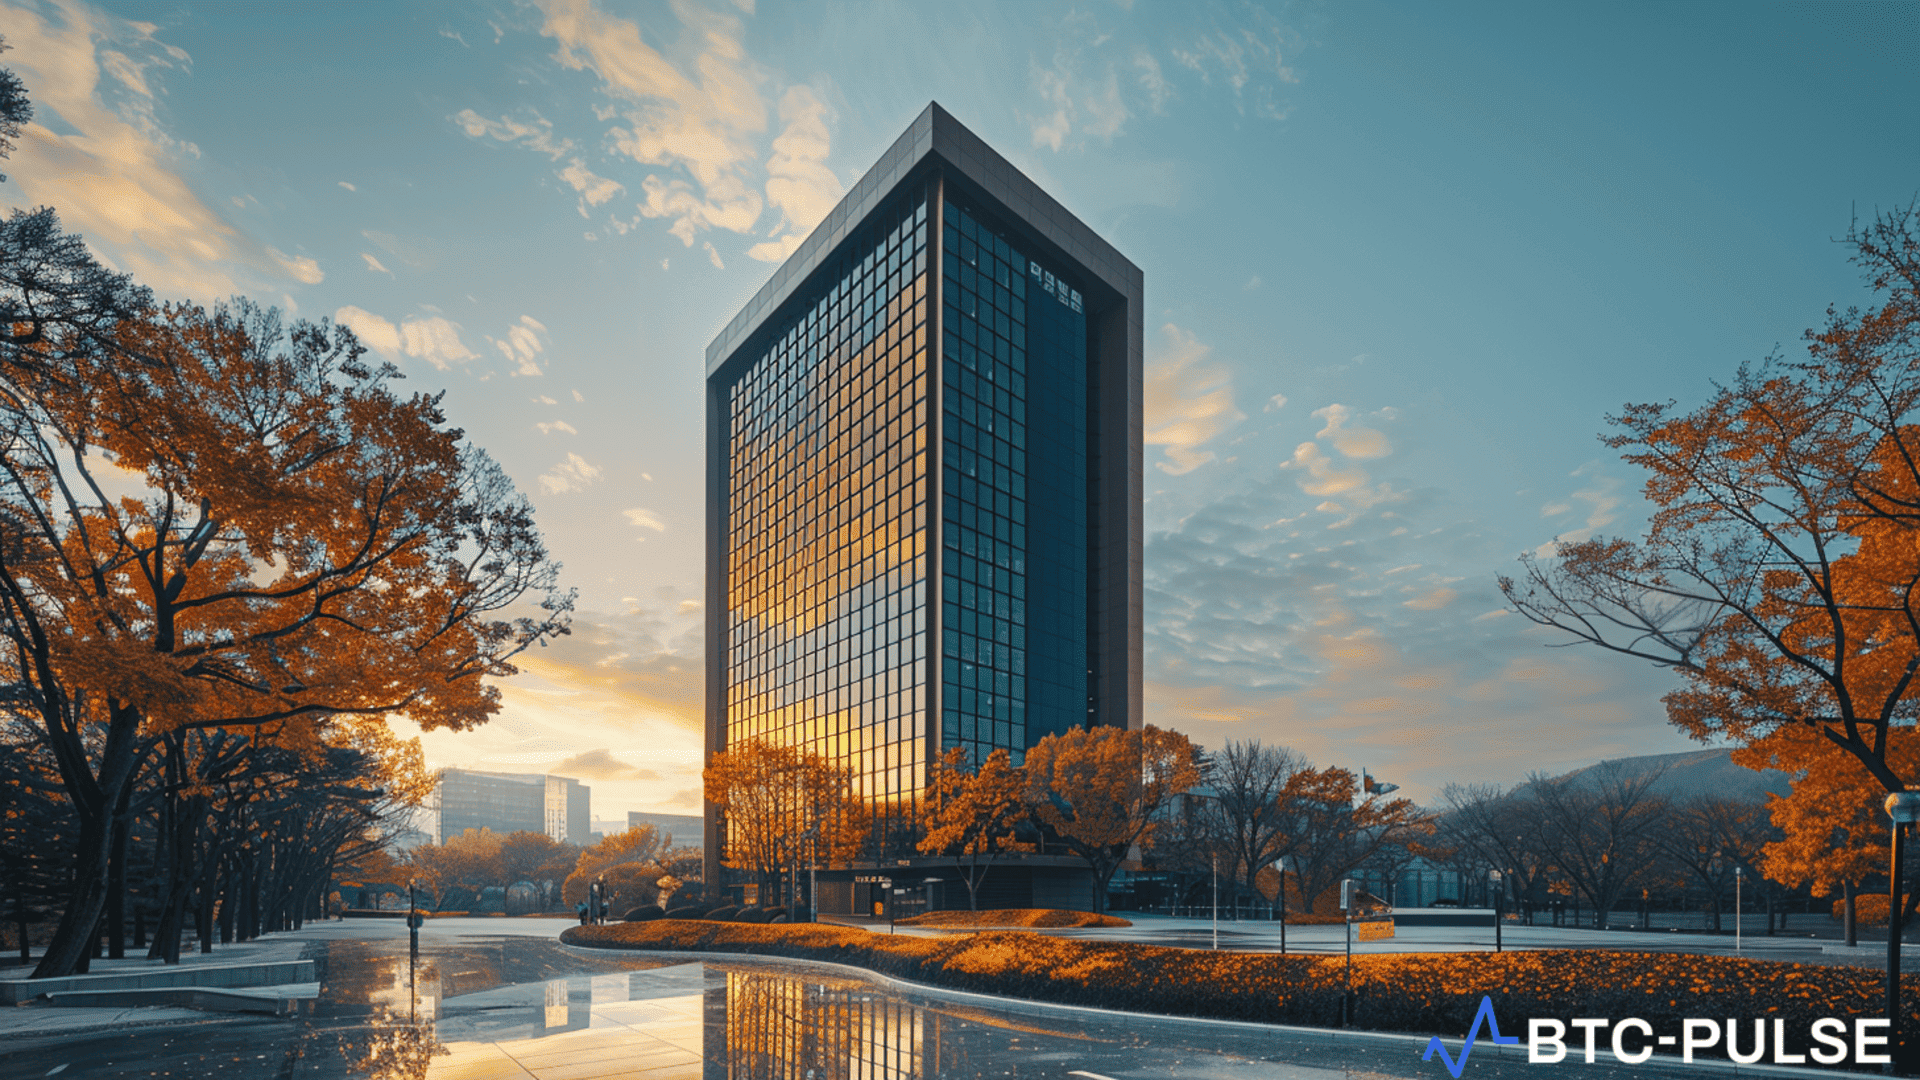 South Korean Financial Supervisory Service headquarters in Seoul